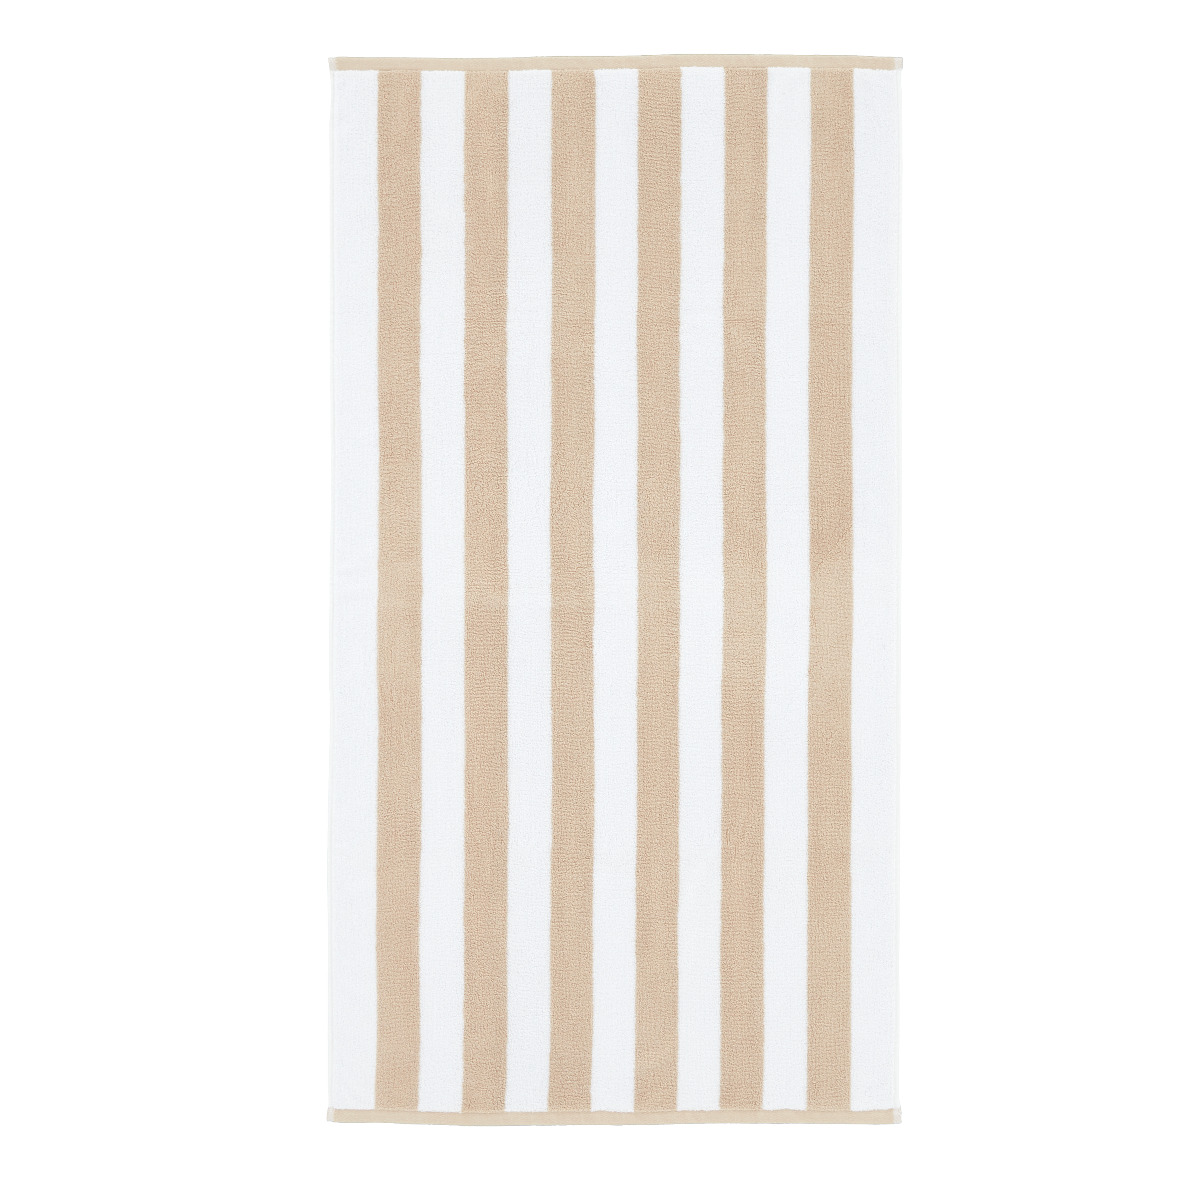 Reversible Striped Jacquard Towels in Natural